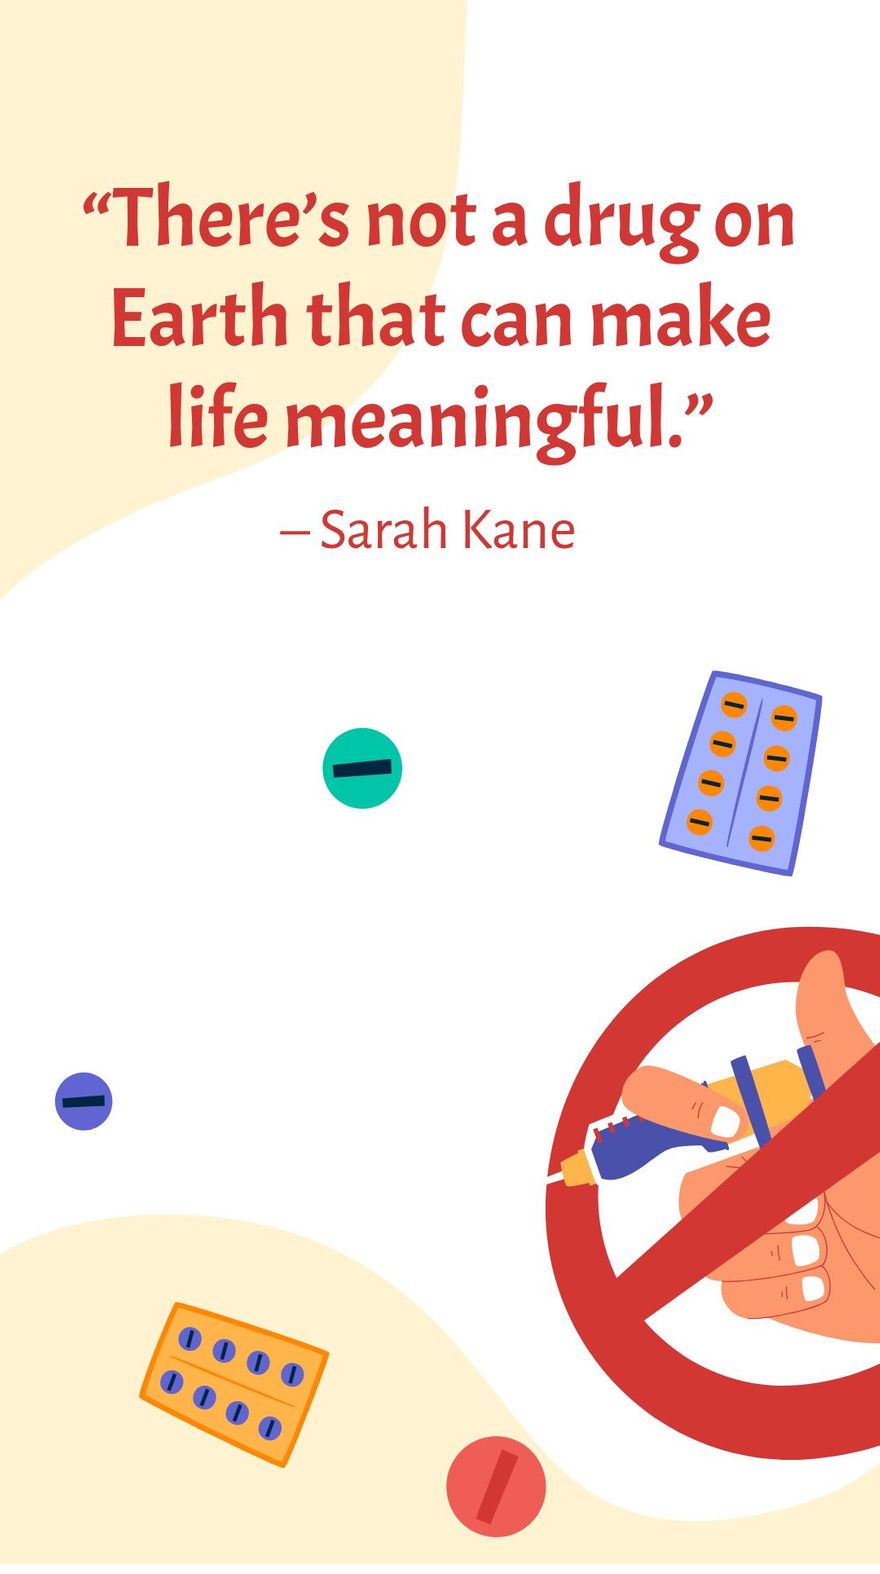 Sarah Kane - There’s Not a Drug on Earth That Can Make Life Meaningful. in JPG